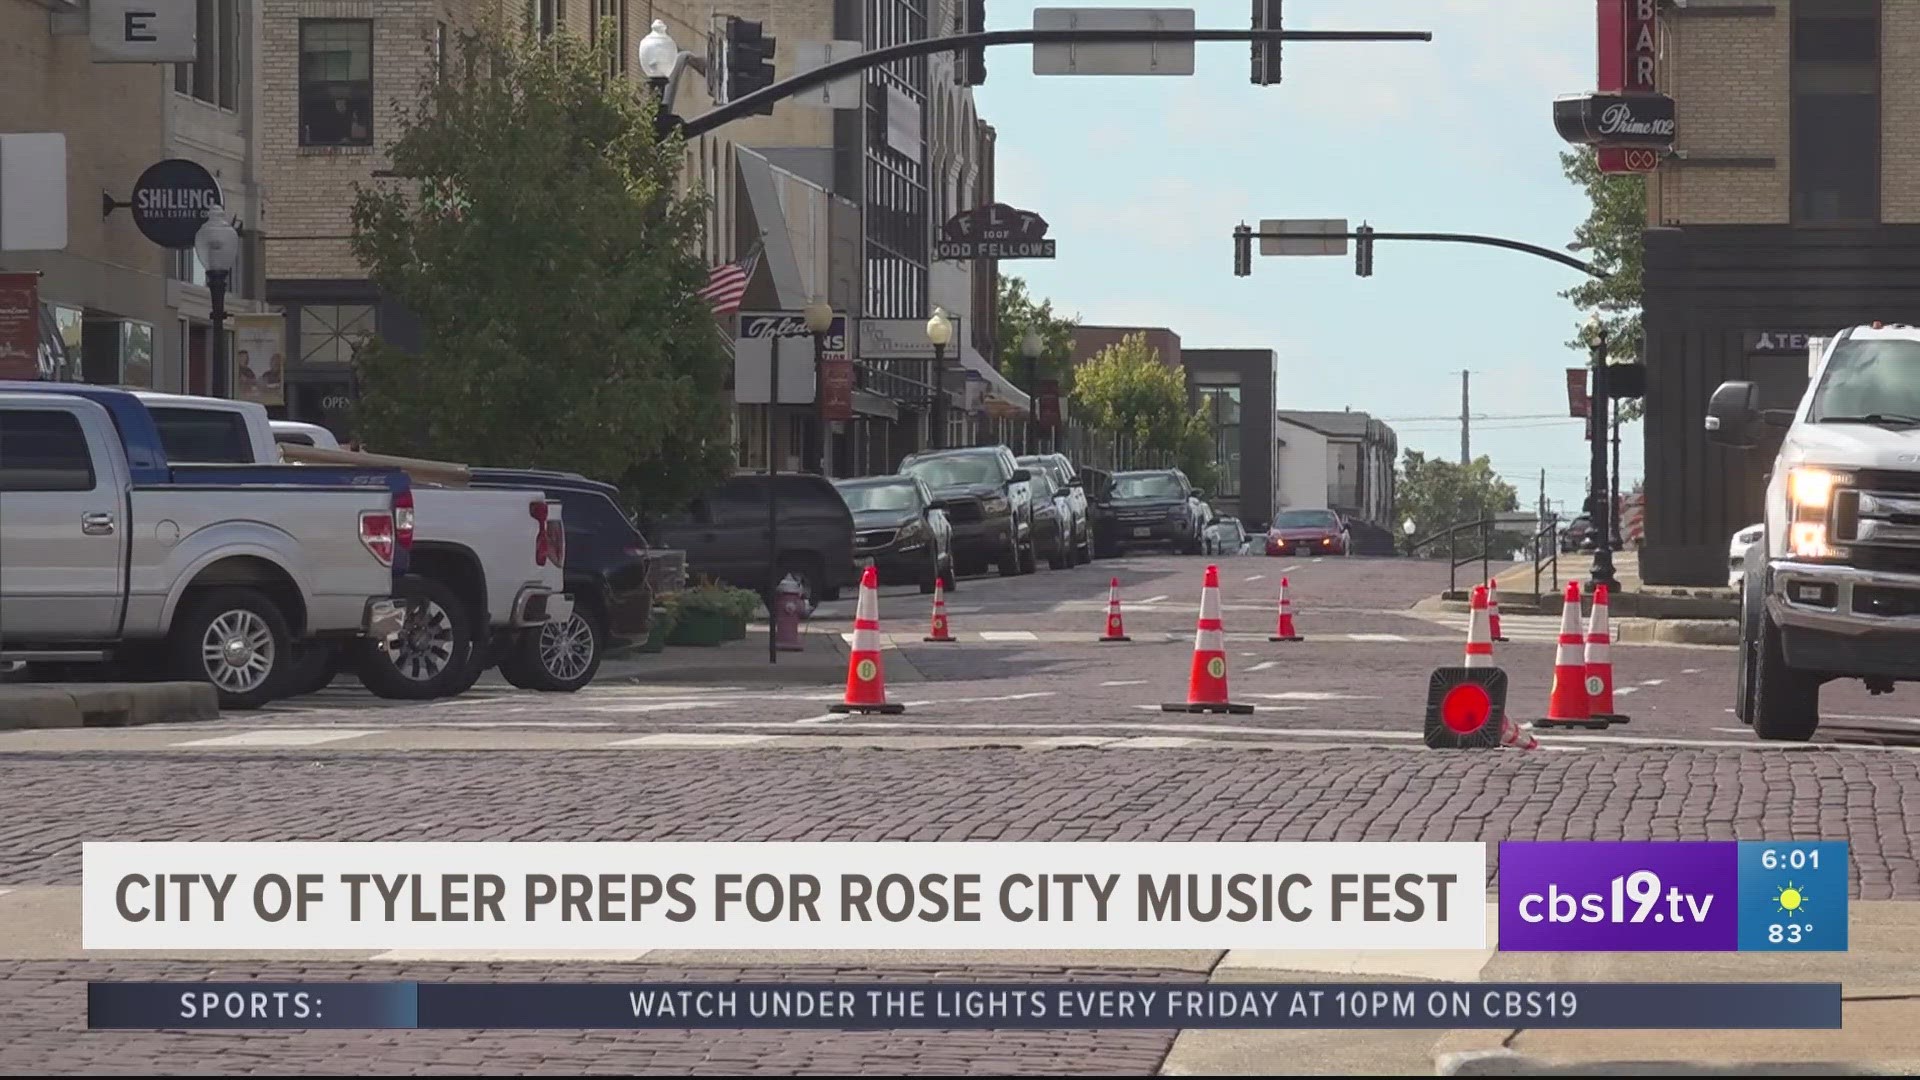 Annual Rose City Festival returns to downtown Tyler this weekend